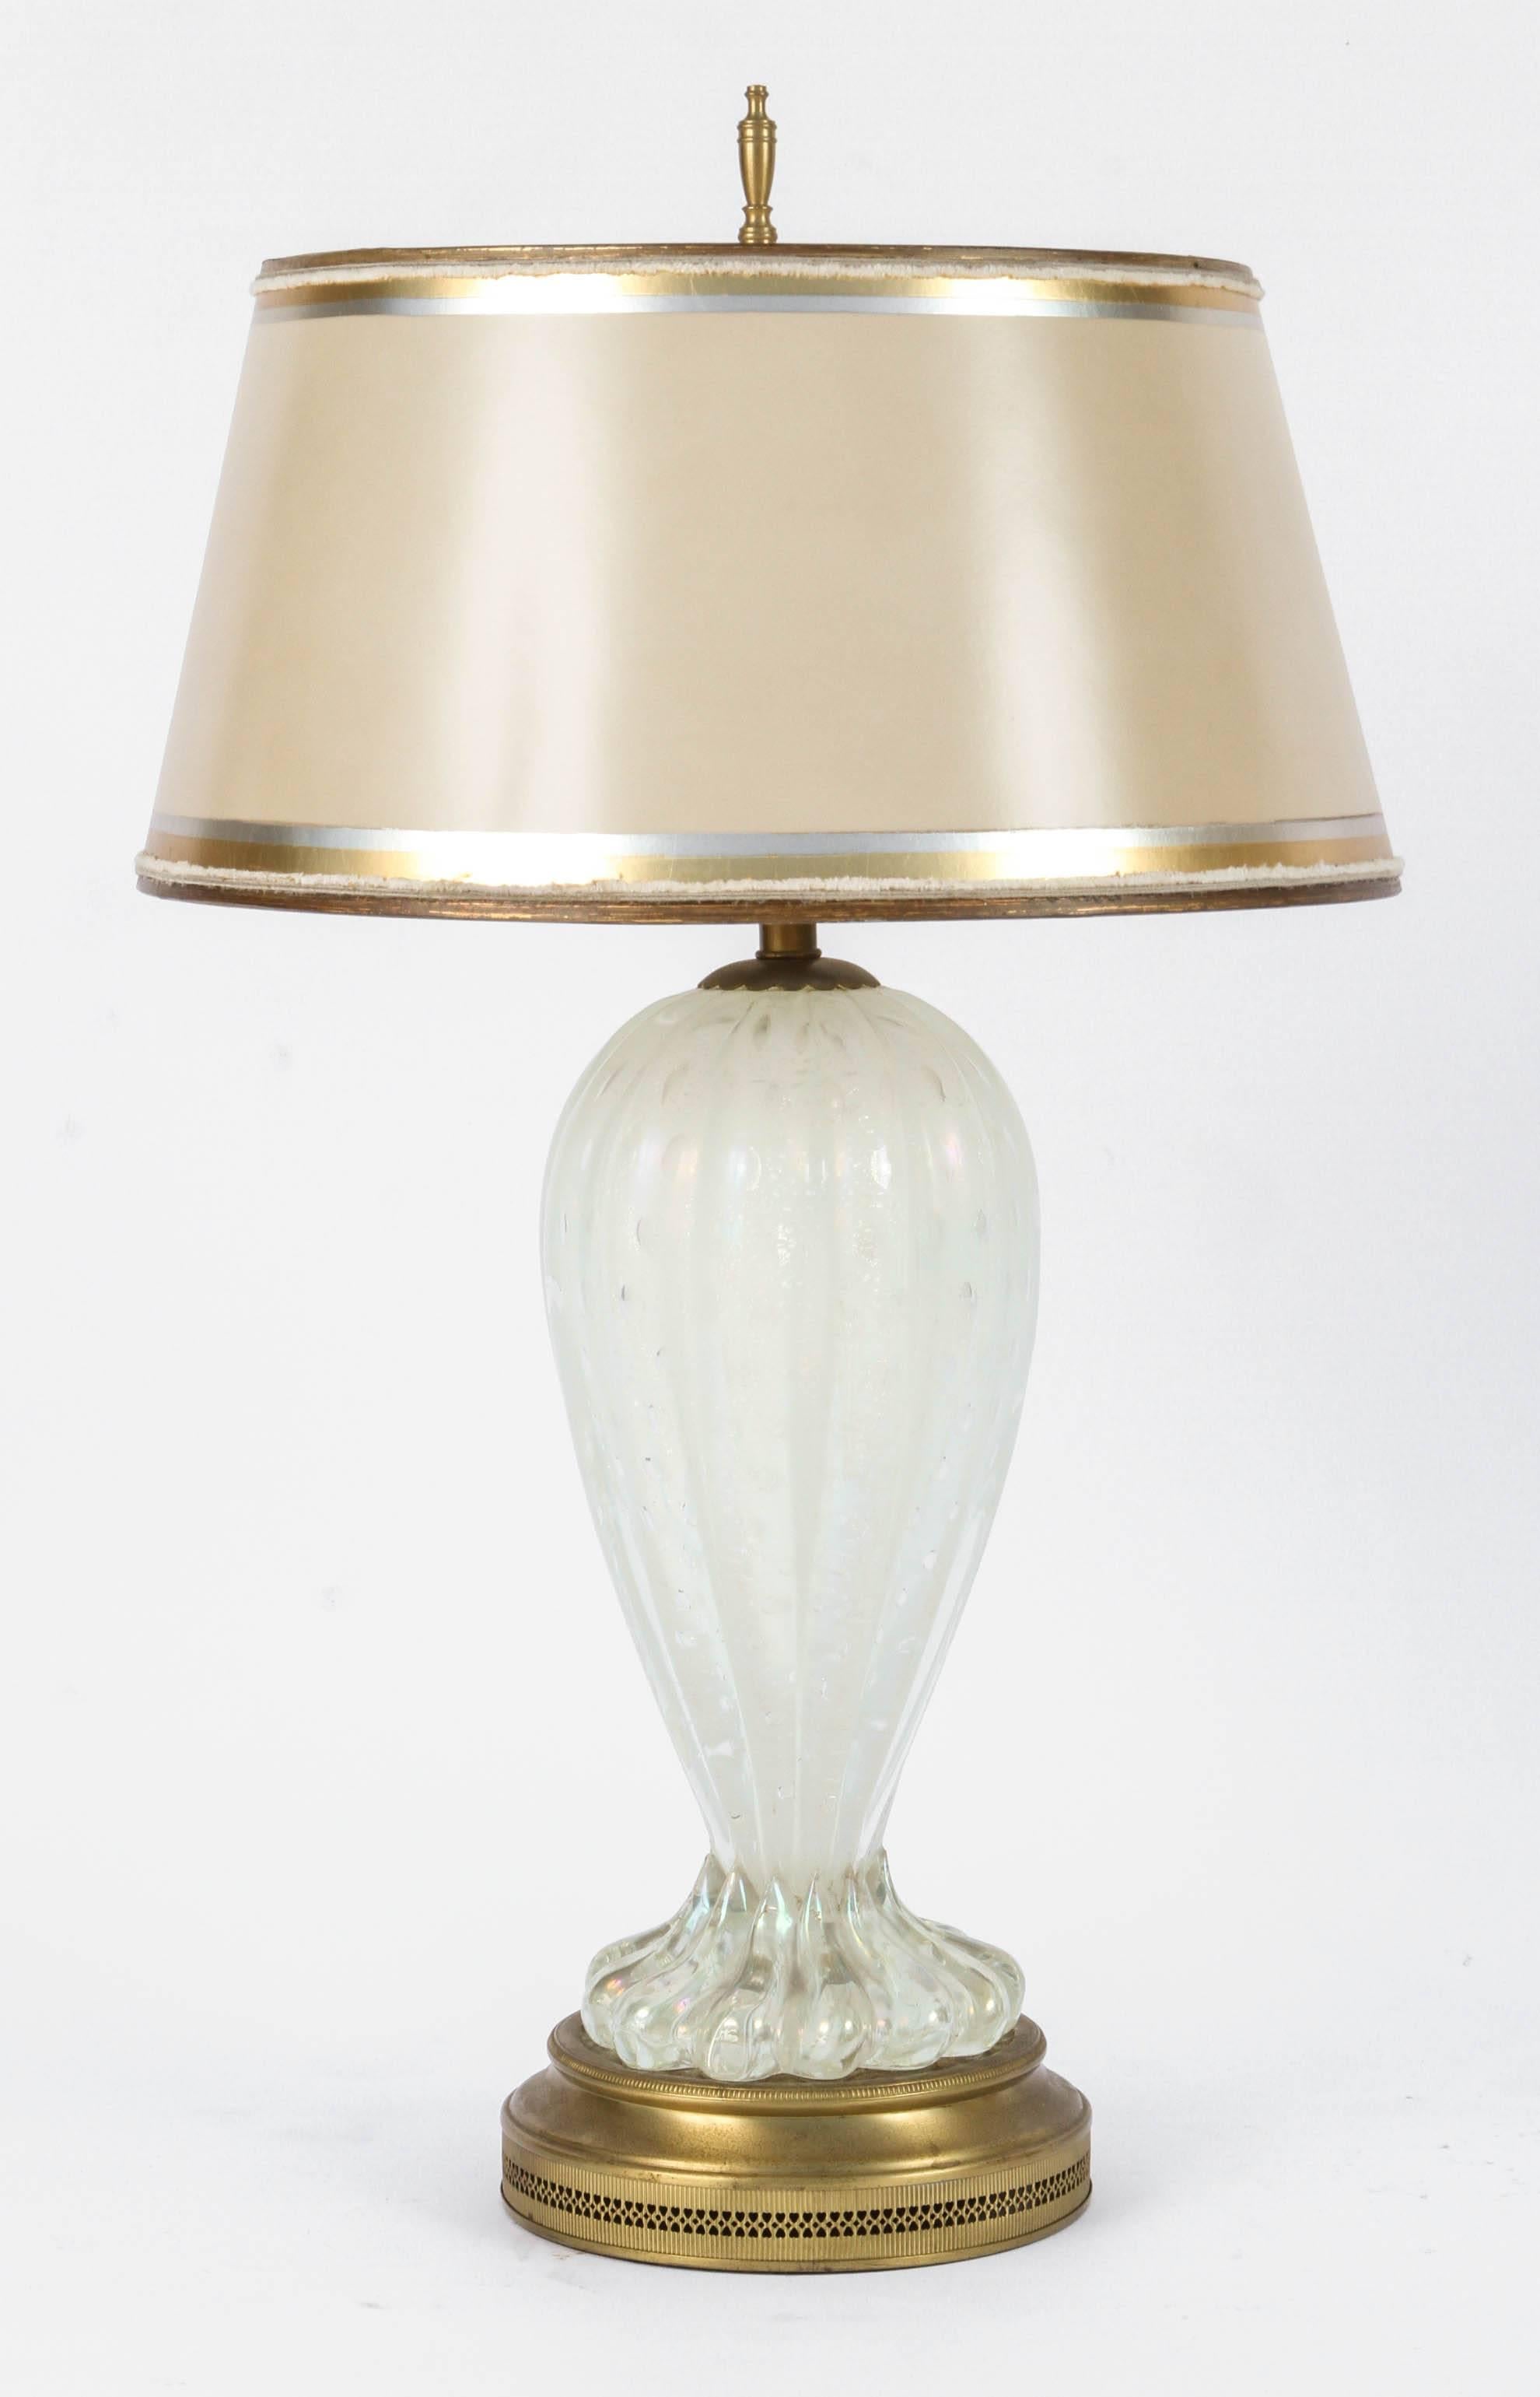 Pair of Mid-Century Italian Murano iridescent lamps with white controlled bubbles on original bases that have been recently gold leafed. 
The shades are included and are handmade of parchment paper. They are hand gilded and decorated in coordinating